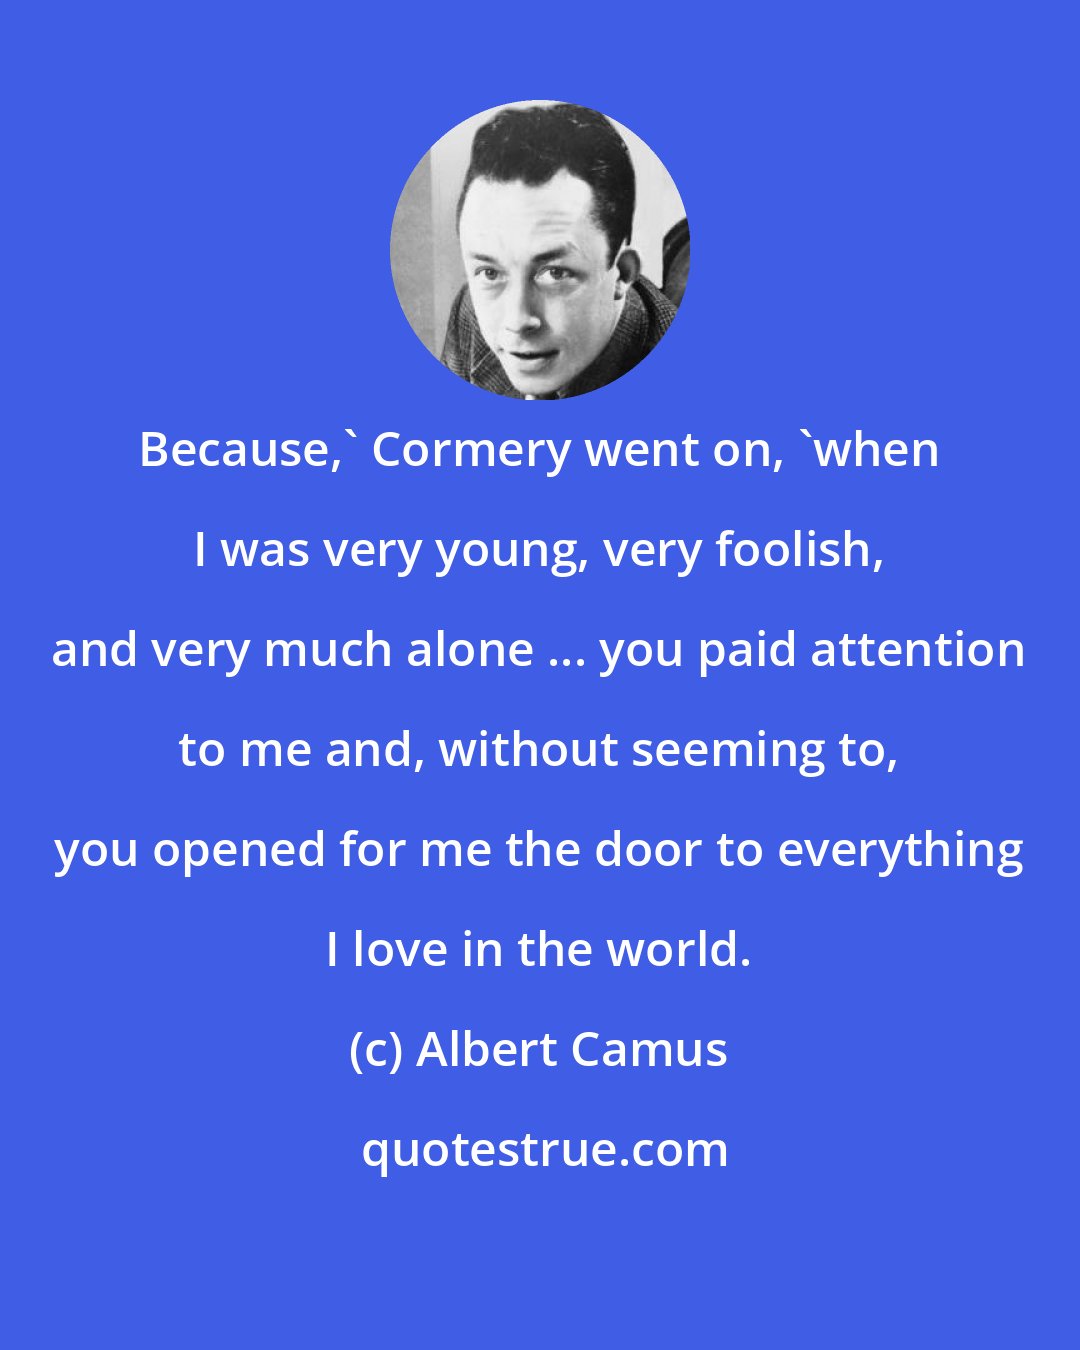 Albert Camus: Because,' Cormery went on, 'when I was very young, very foolish, and very much alone ... you paid attention to me and, without seeming to, you opened for me the door to everything I love in the world.